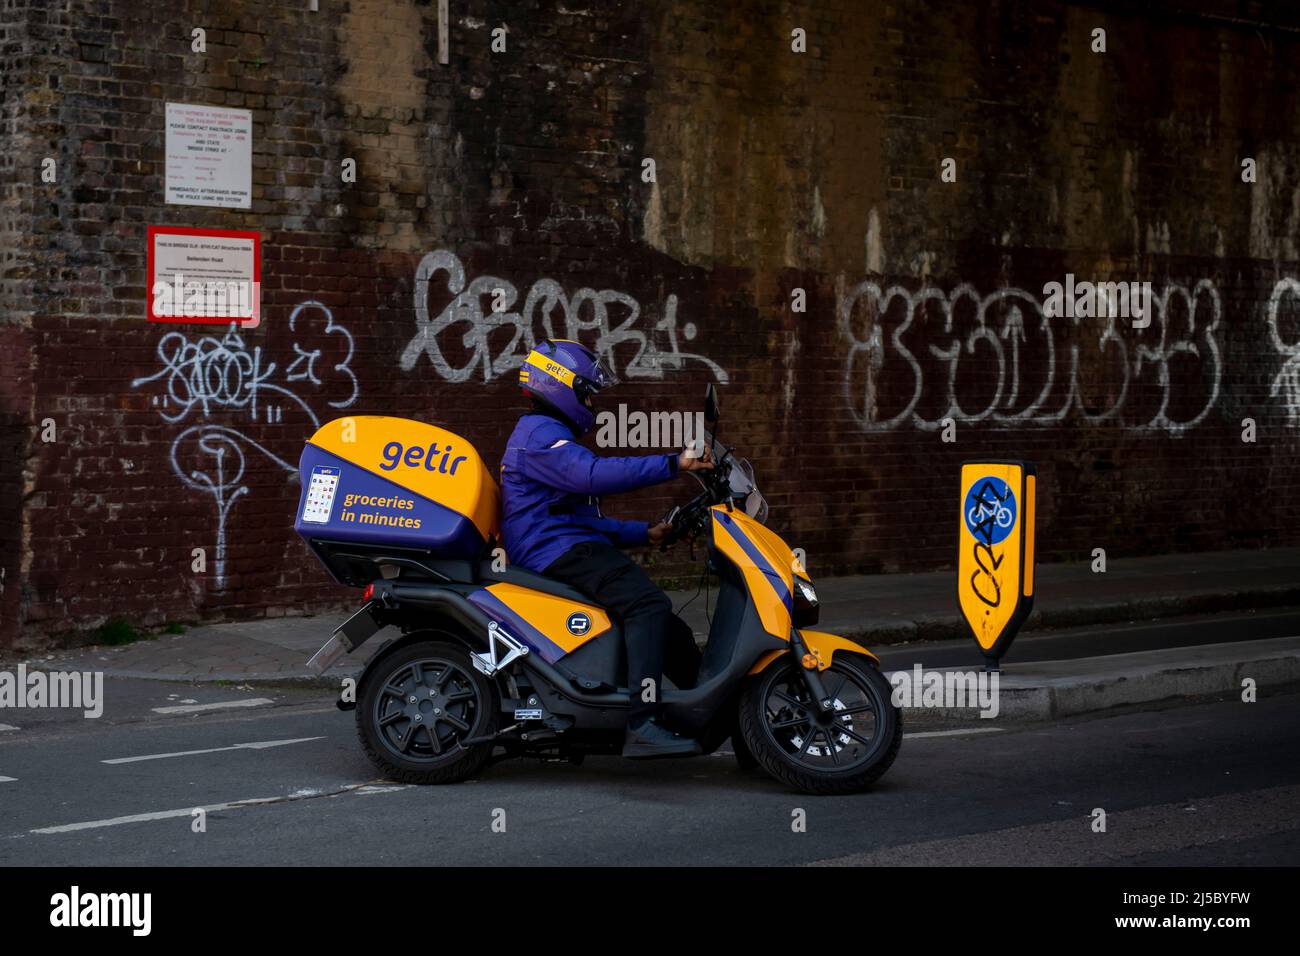 A Getir courier on a moped Stock Photo